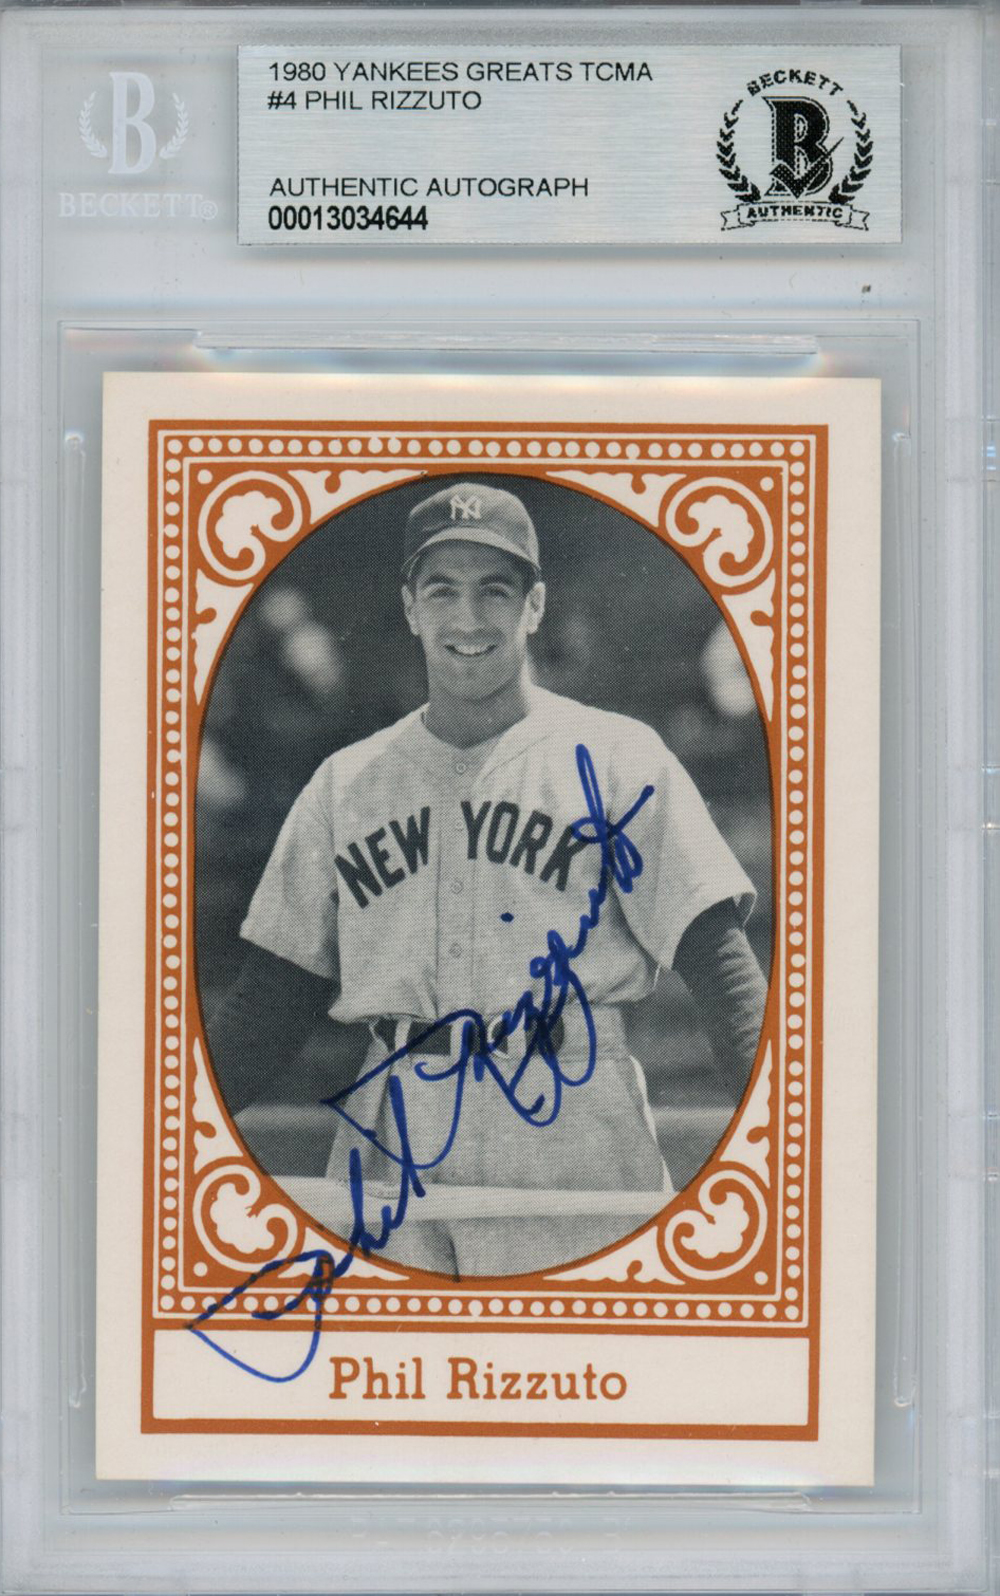 Phil Rizzuto Signed 1980 Yankees Greats TCMA #4 Trading Card Beckett Slab